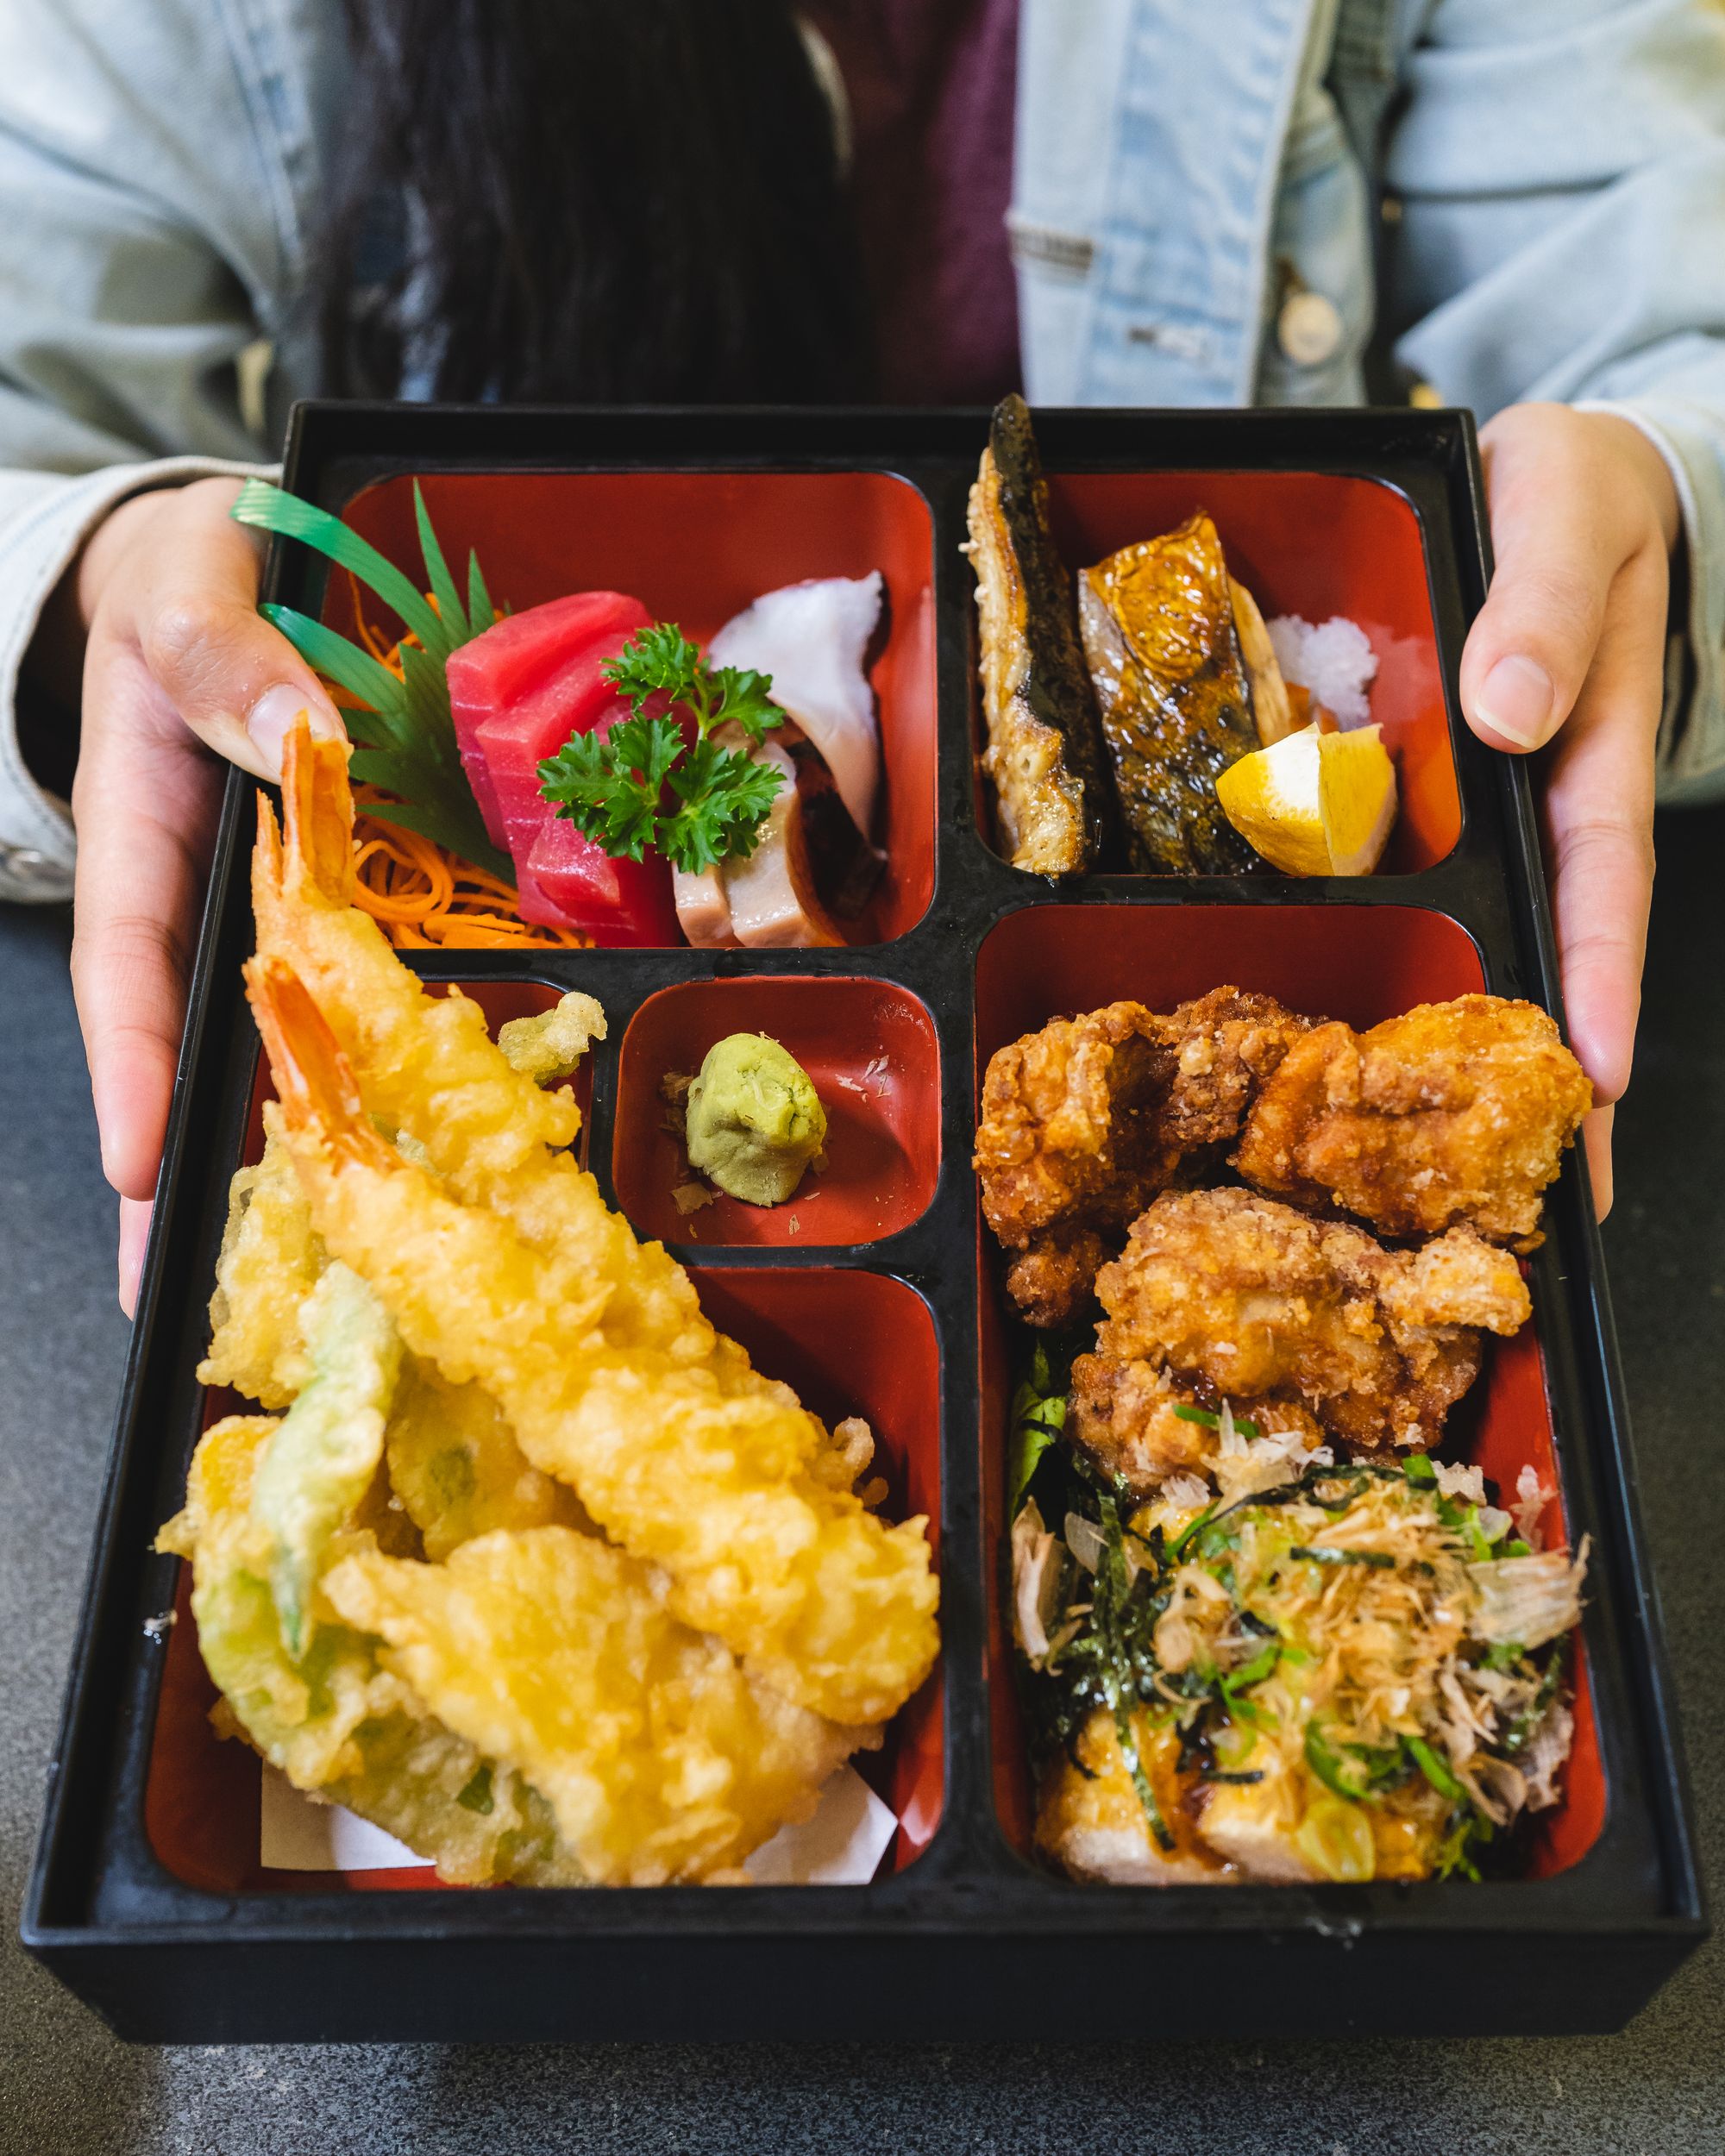 Hand holding a bento box full of Japanese dishes